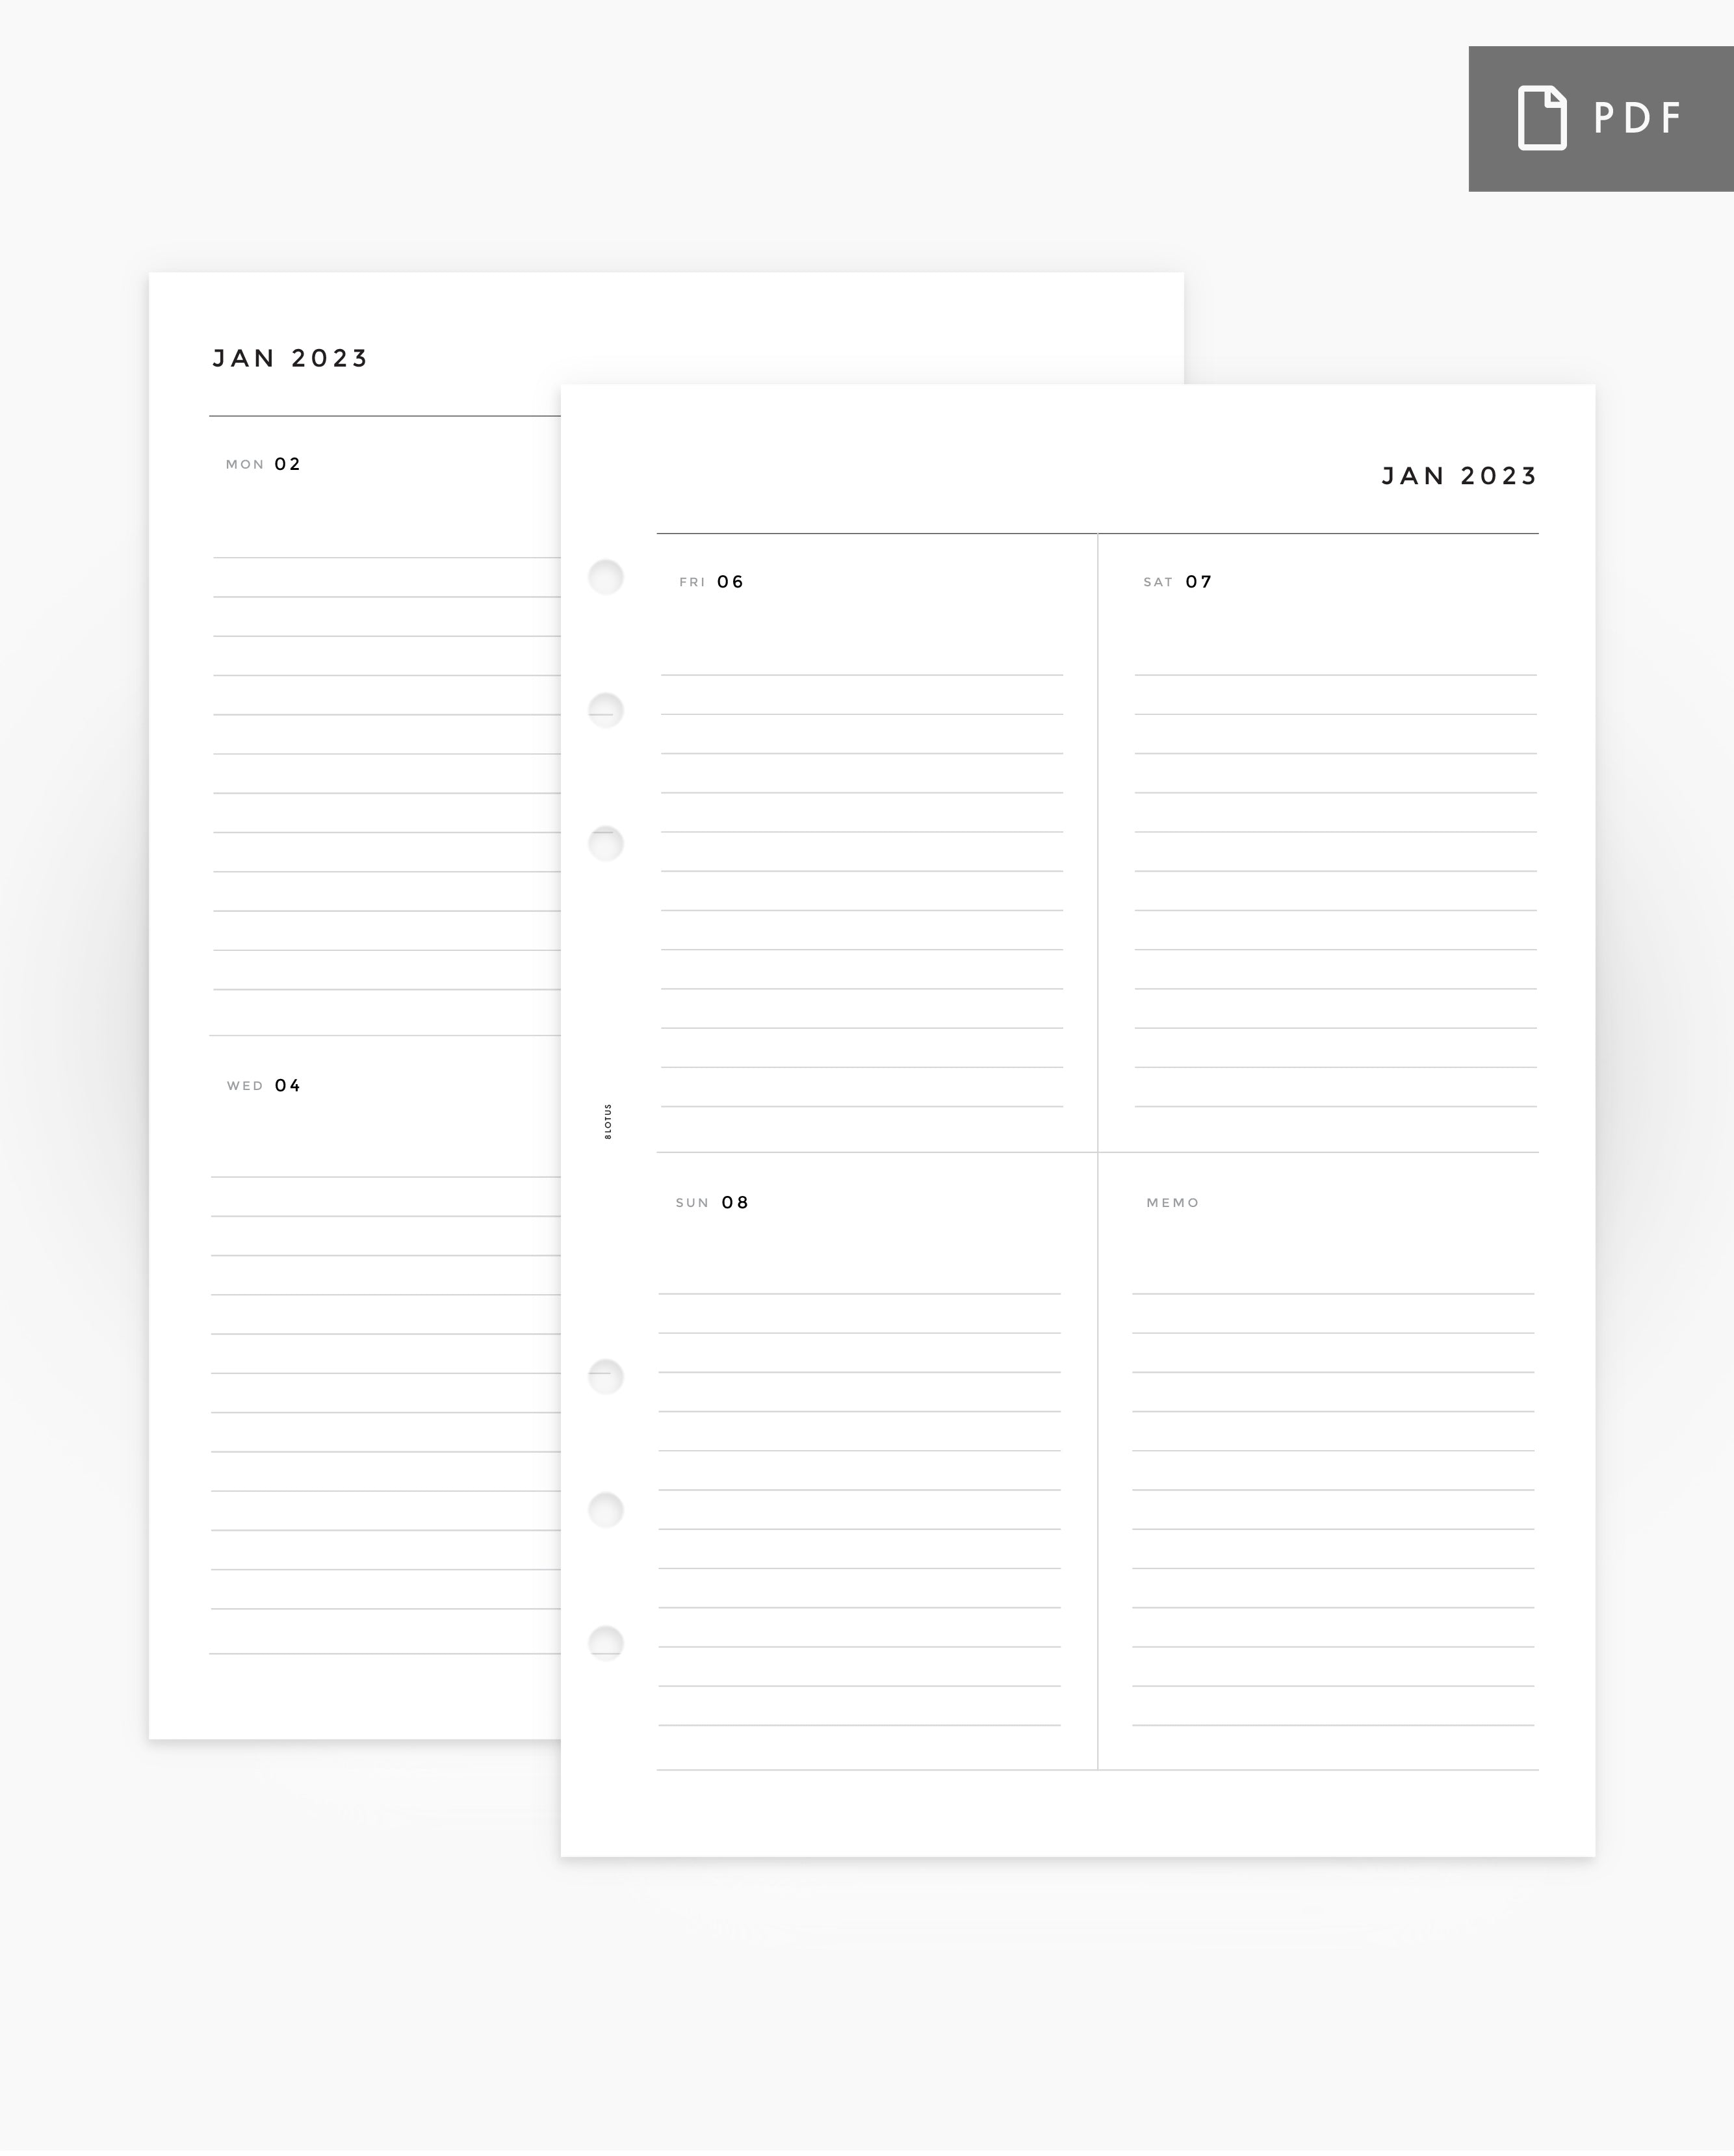 MN015 - 2023 WEEKLY PLANNER - WO2P - PDF